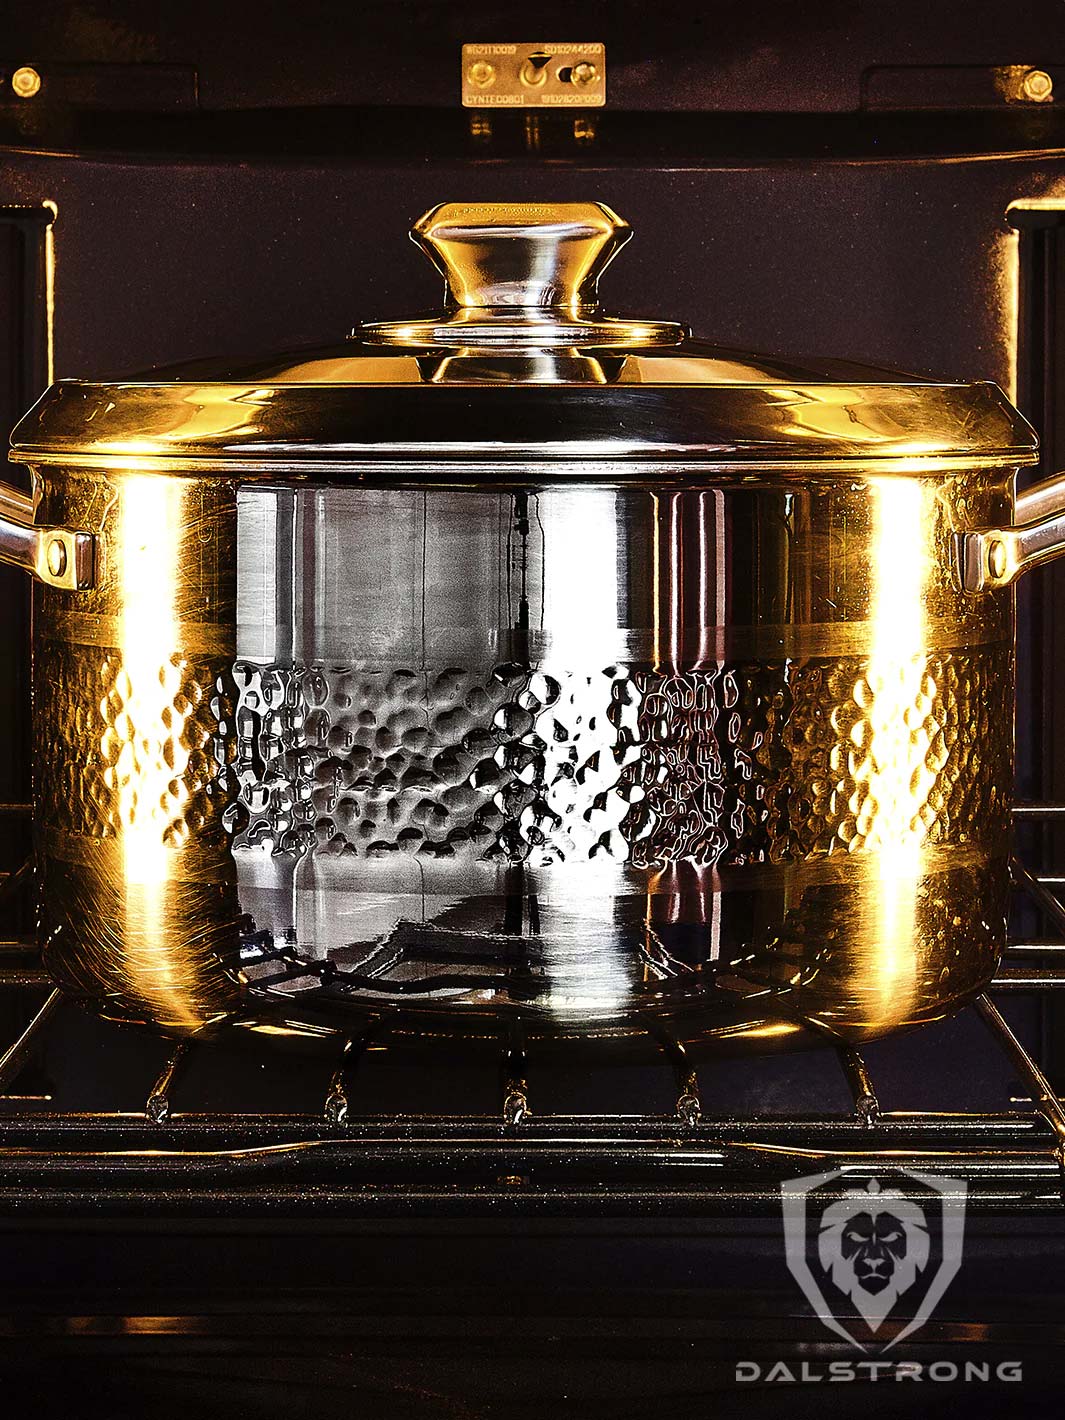 Dalstrong avalon series 8 quart stock pot hammered finish silver inside an oven.